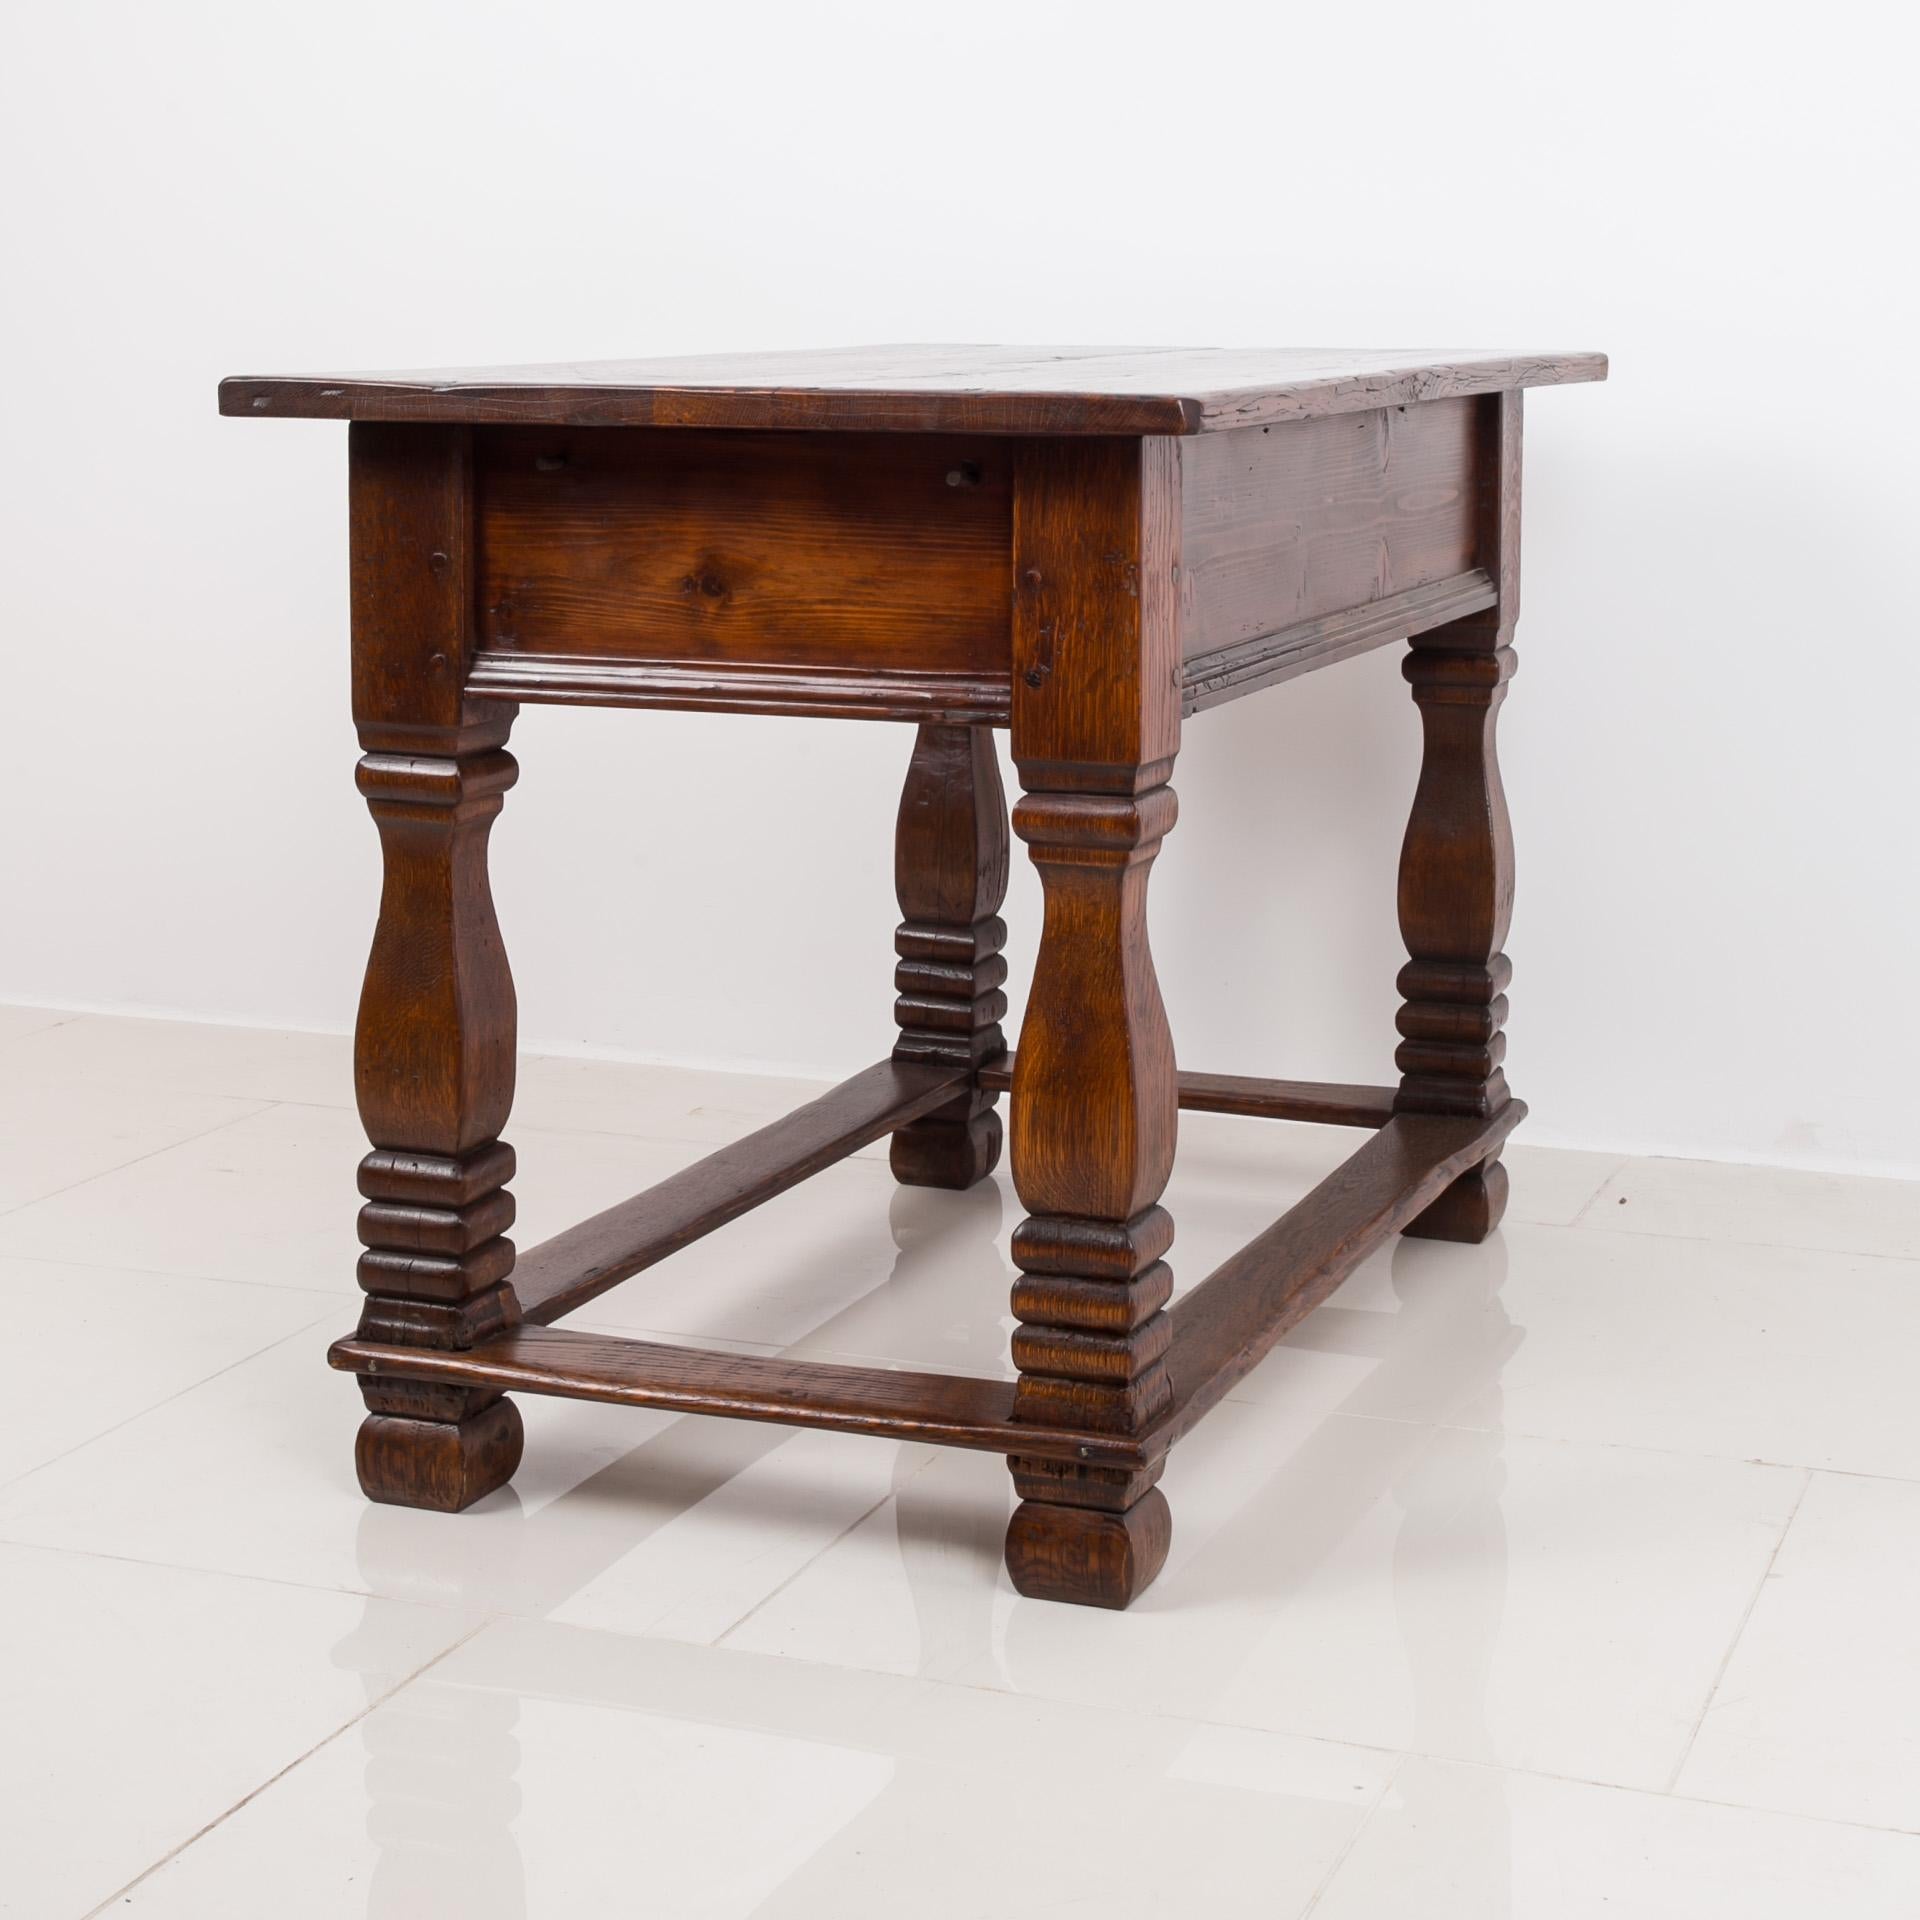 Solid Oak Table, 18th / 19th Century, Rustic Style, Prep or Dining Table 2